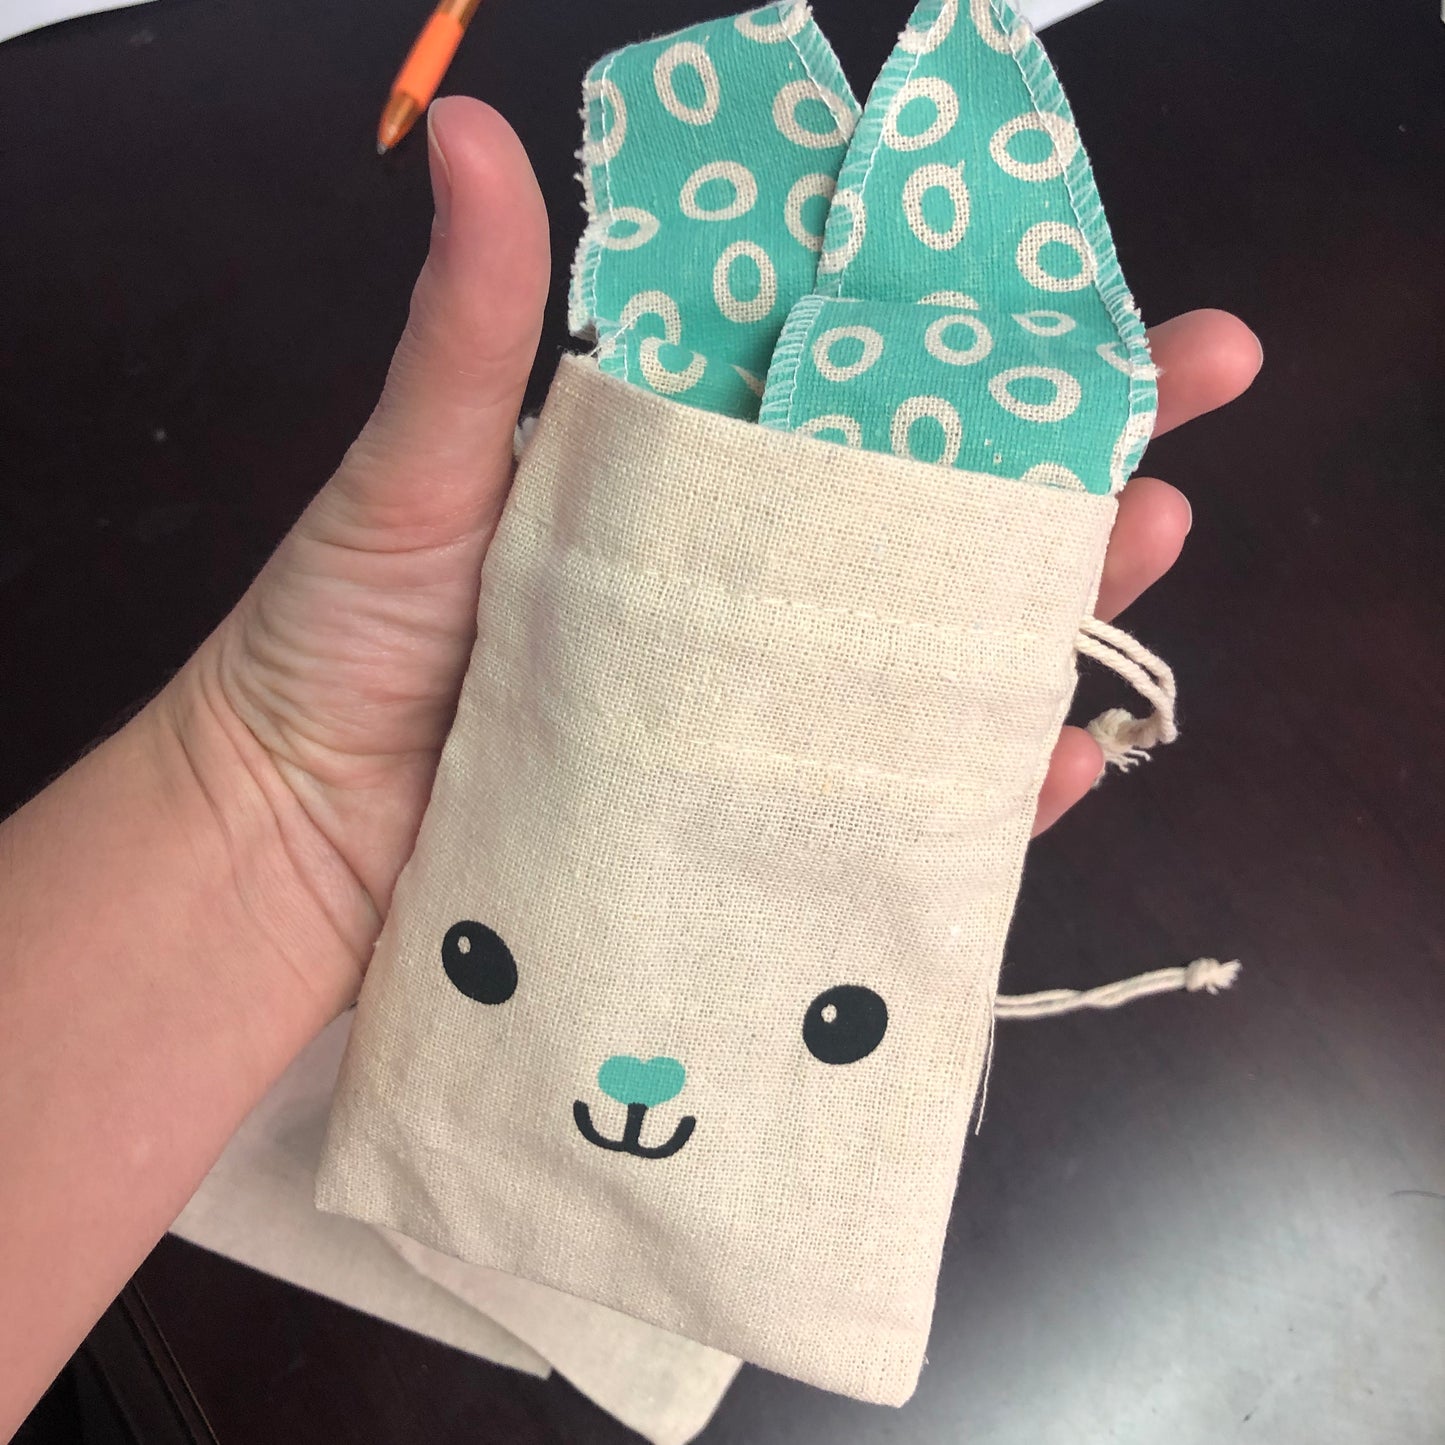 Canvas Easter Little Bag Totes